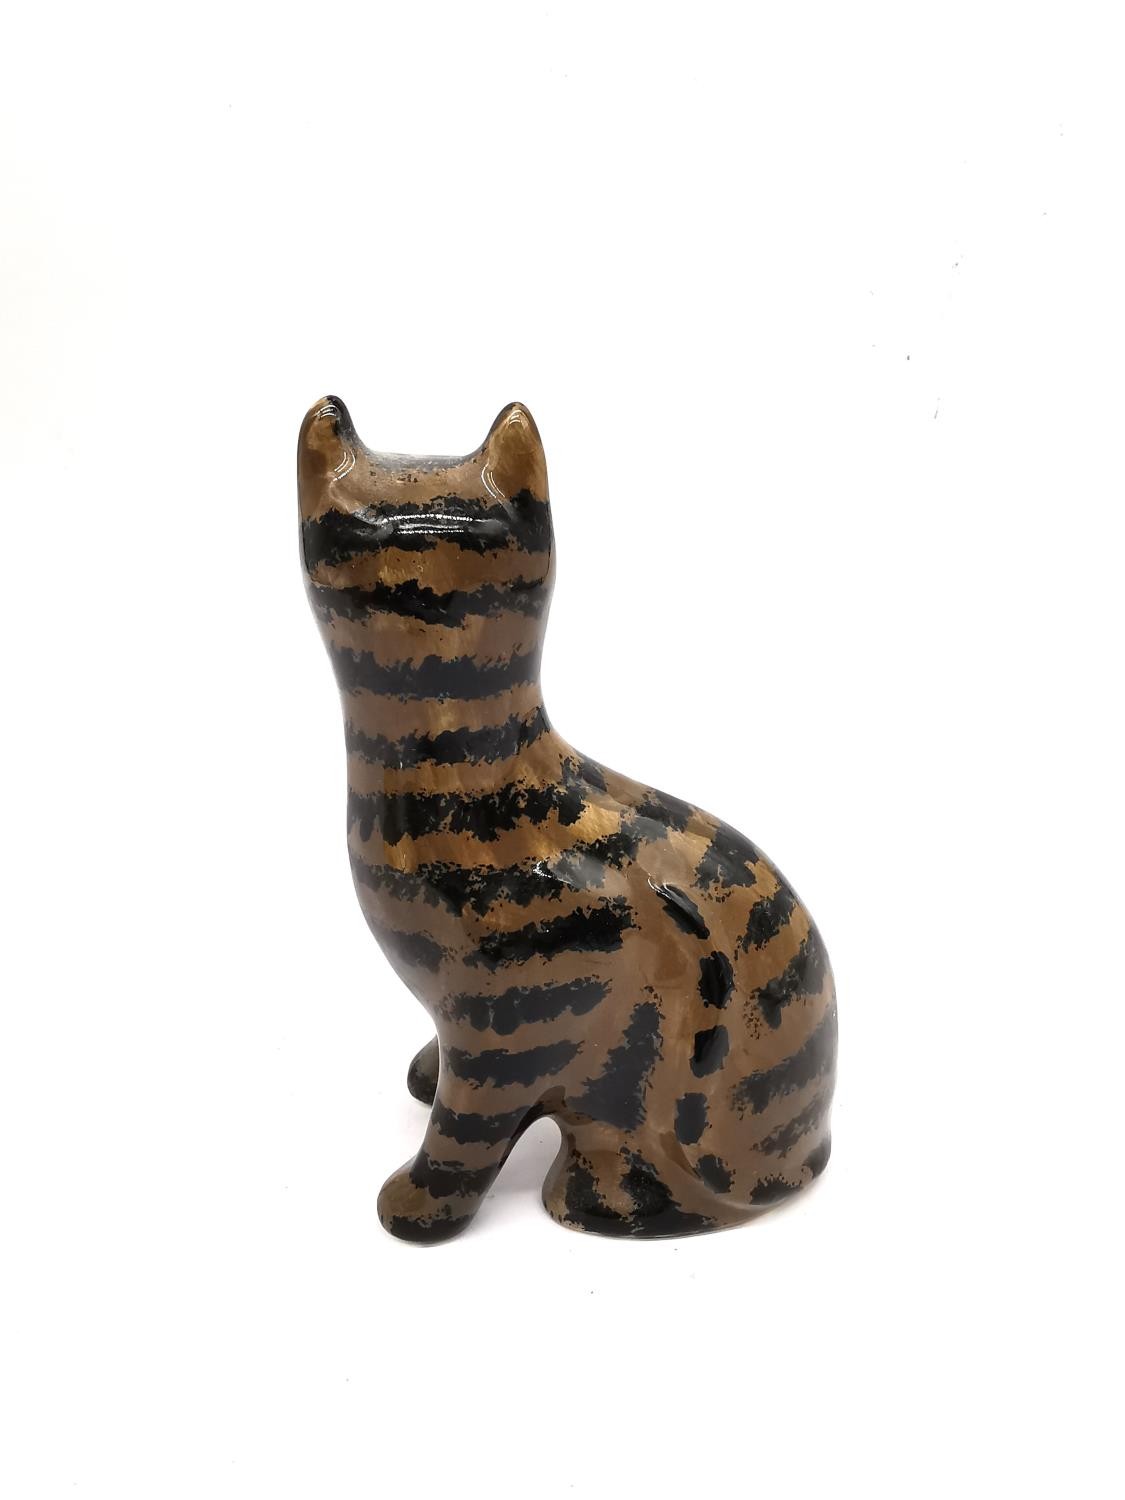 A hand painted G. Hill Wemyss striped cat, signed to base. H.18 L.11.5 D.7cm. - Image 2 of 5